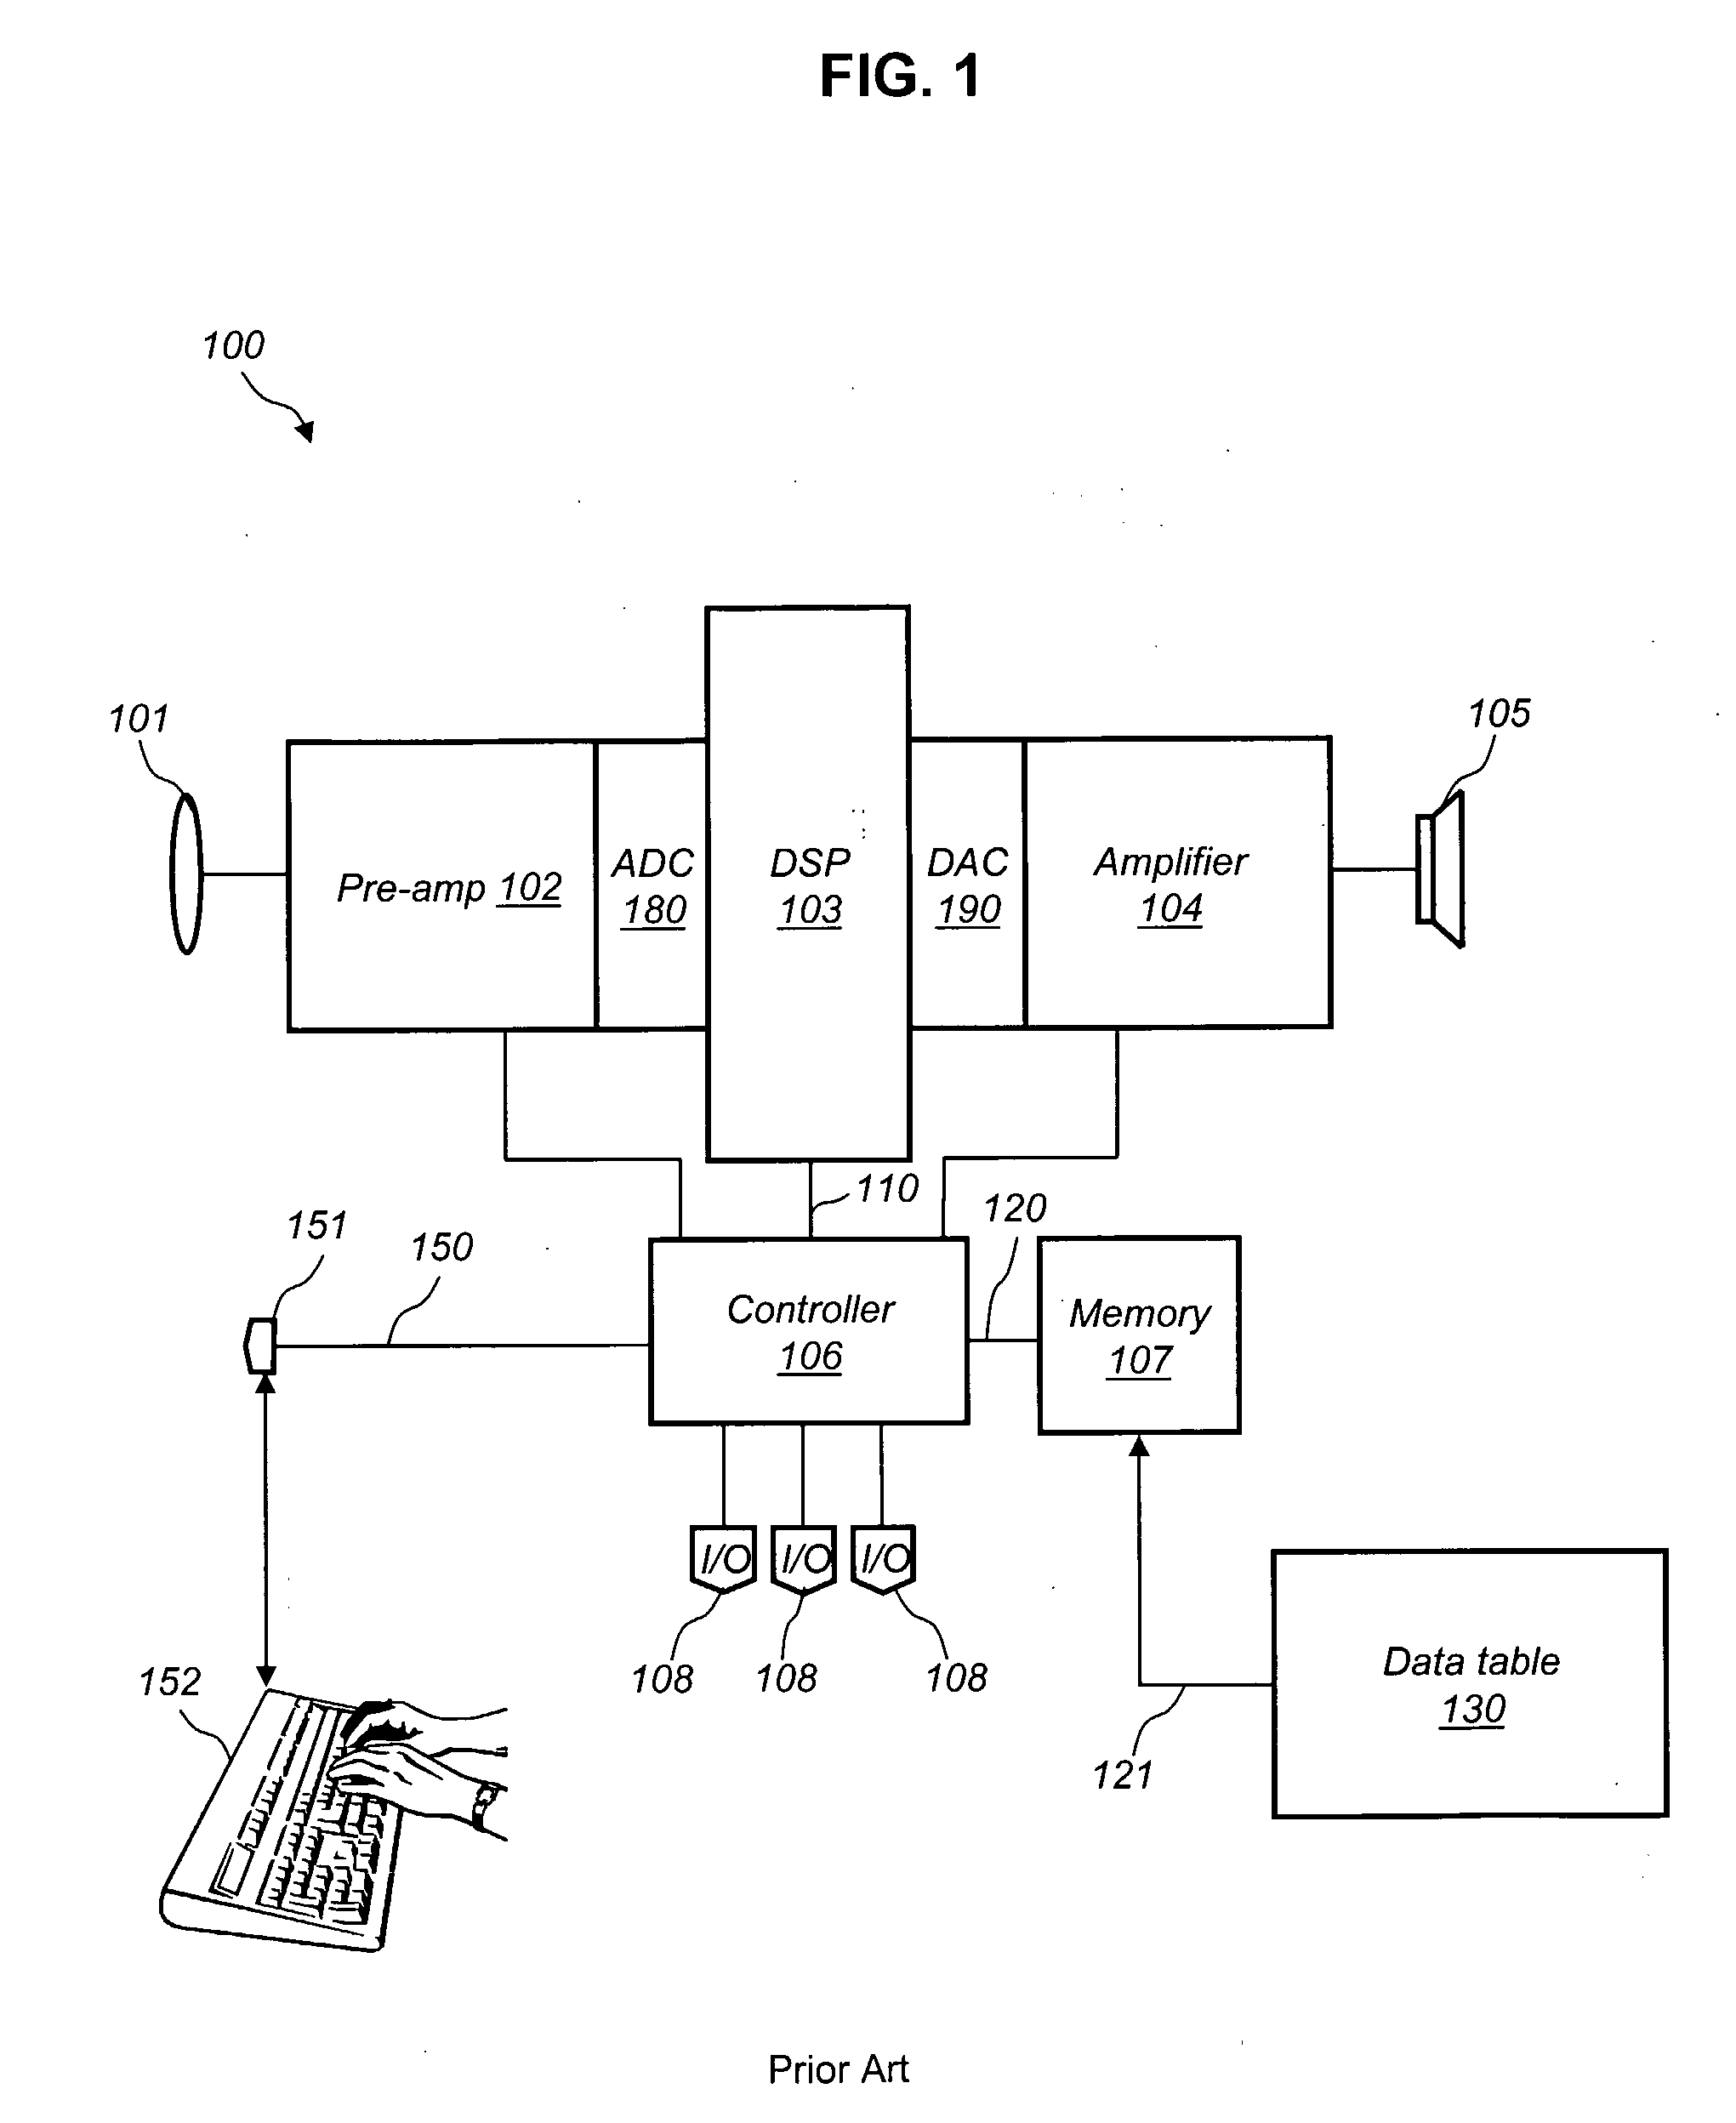 System For and Method of Increasing Convenience to Users to Drive the Purchase Process For Hearing Health That Results in Purchase of a Hearing Aid